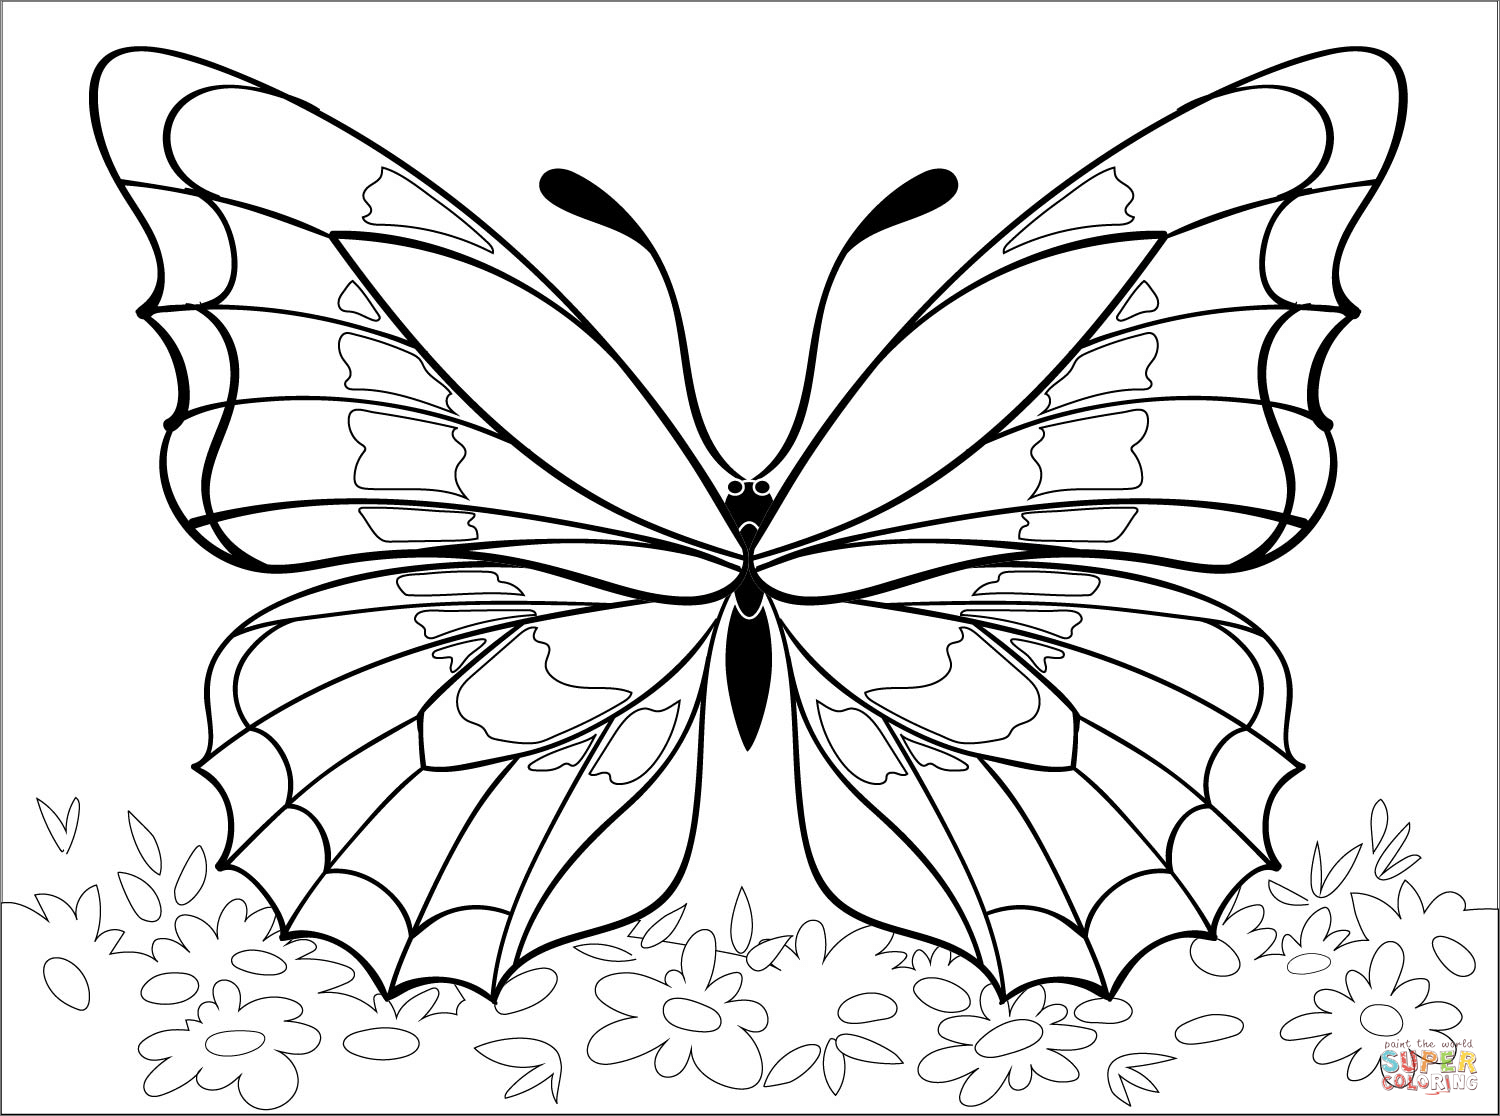 Butterfly coloring page free printable coloring pages